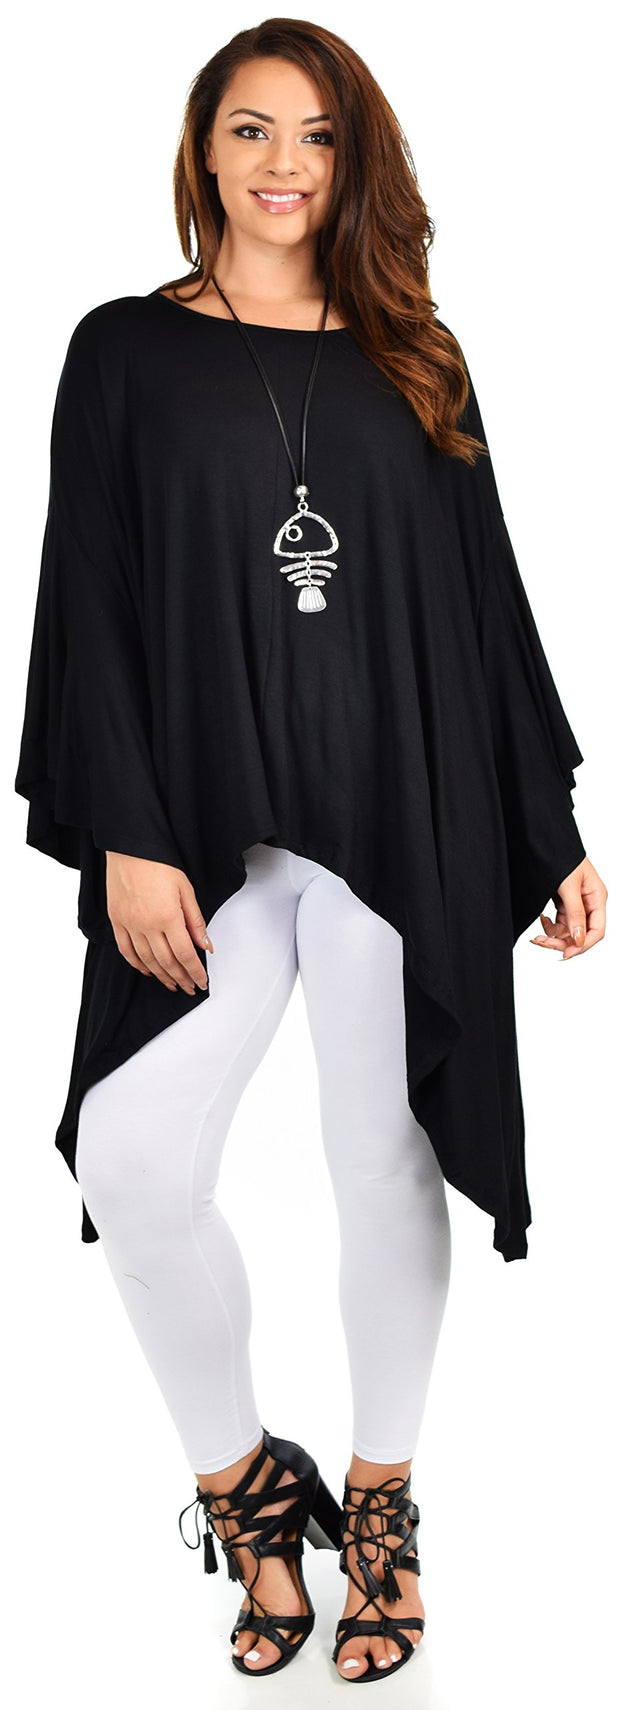 Asymmetrical Oversized Tunic , Full Figured Poncho Top, Plus Size Tunic top, Top Cover Up w/ Butterfly Sleeves